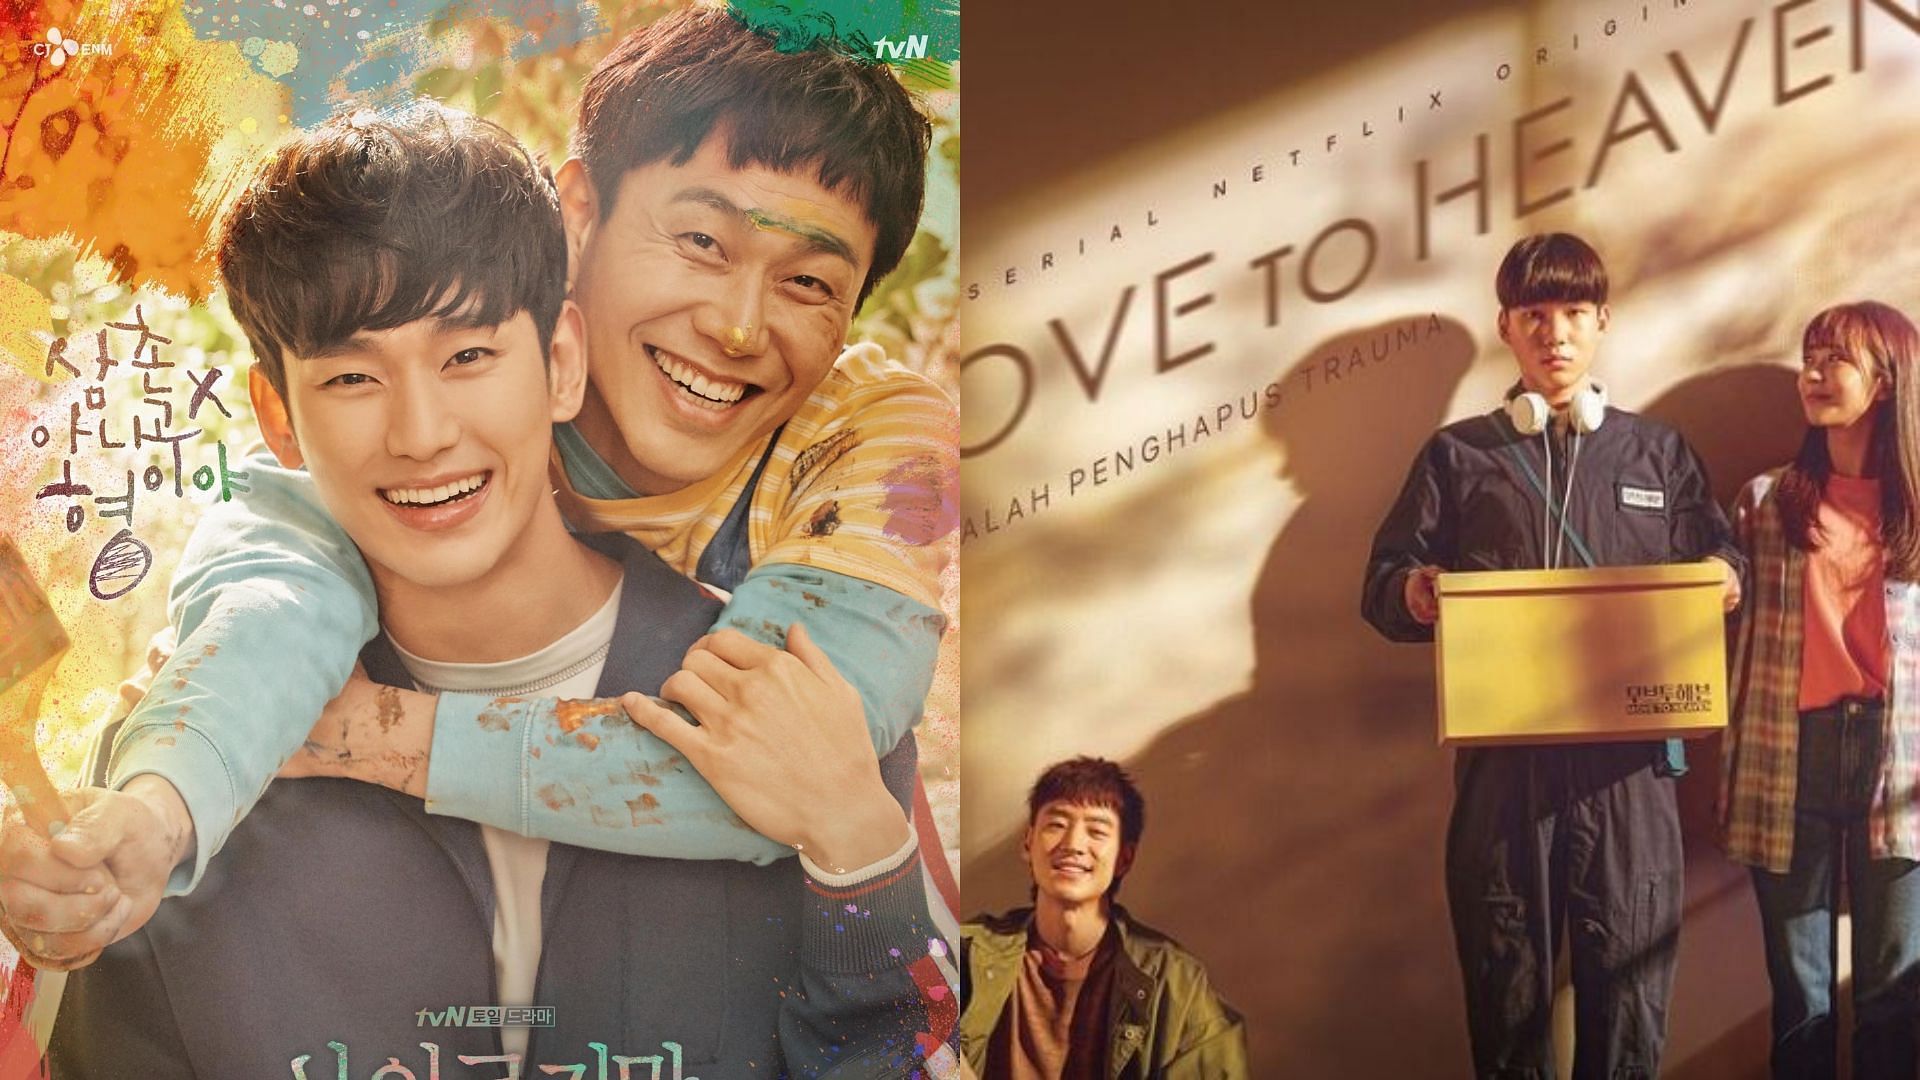 The posters for K-dramas Move to Heaven and Its Okay to Not be Okay (Image via Netflix)